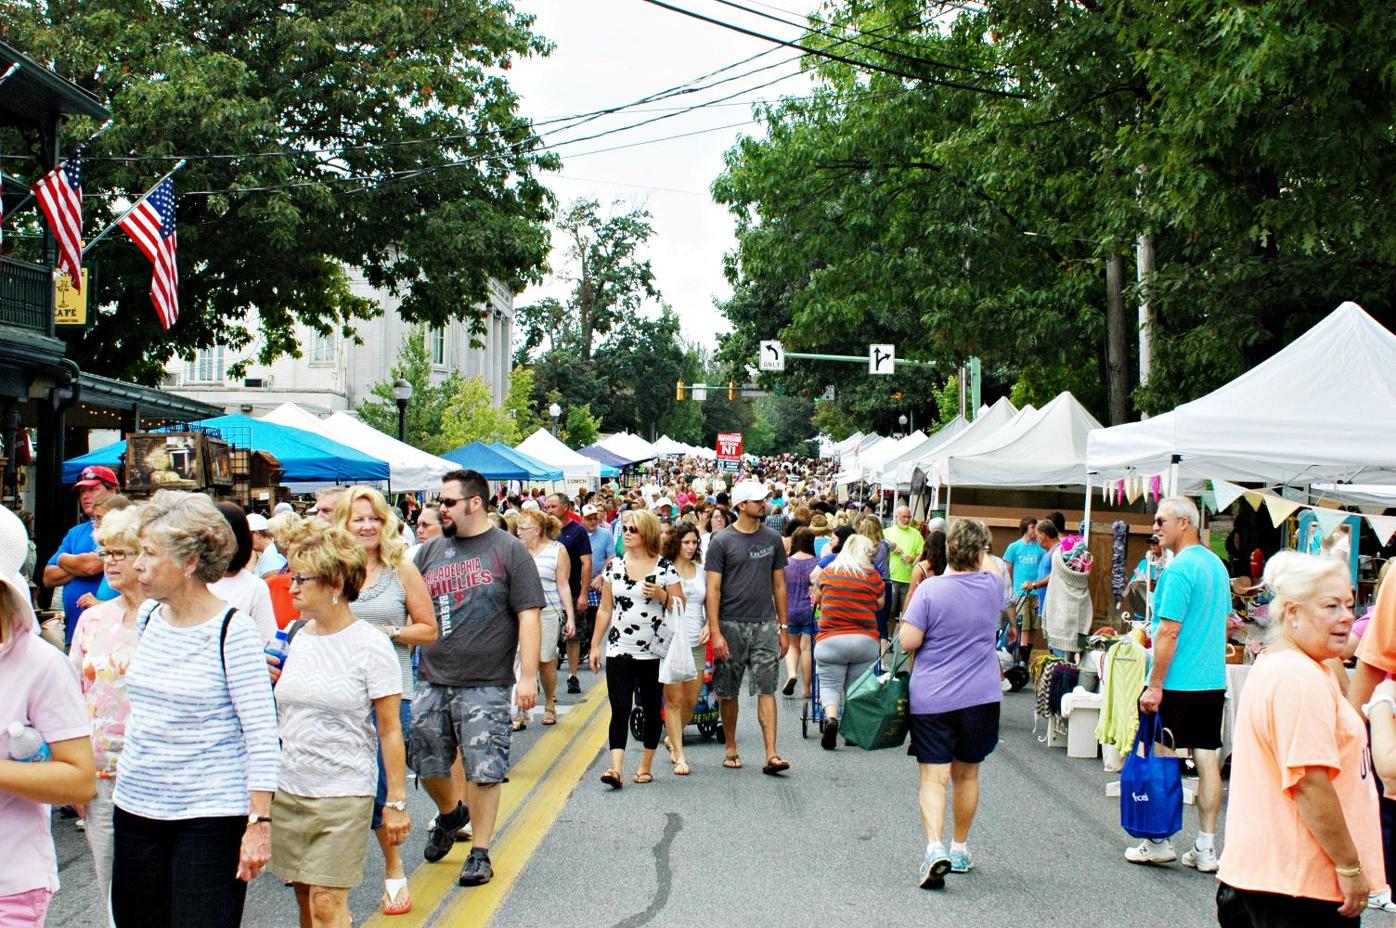 More than 500 vendors coming to Rotary Club of Lititz Craft Show